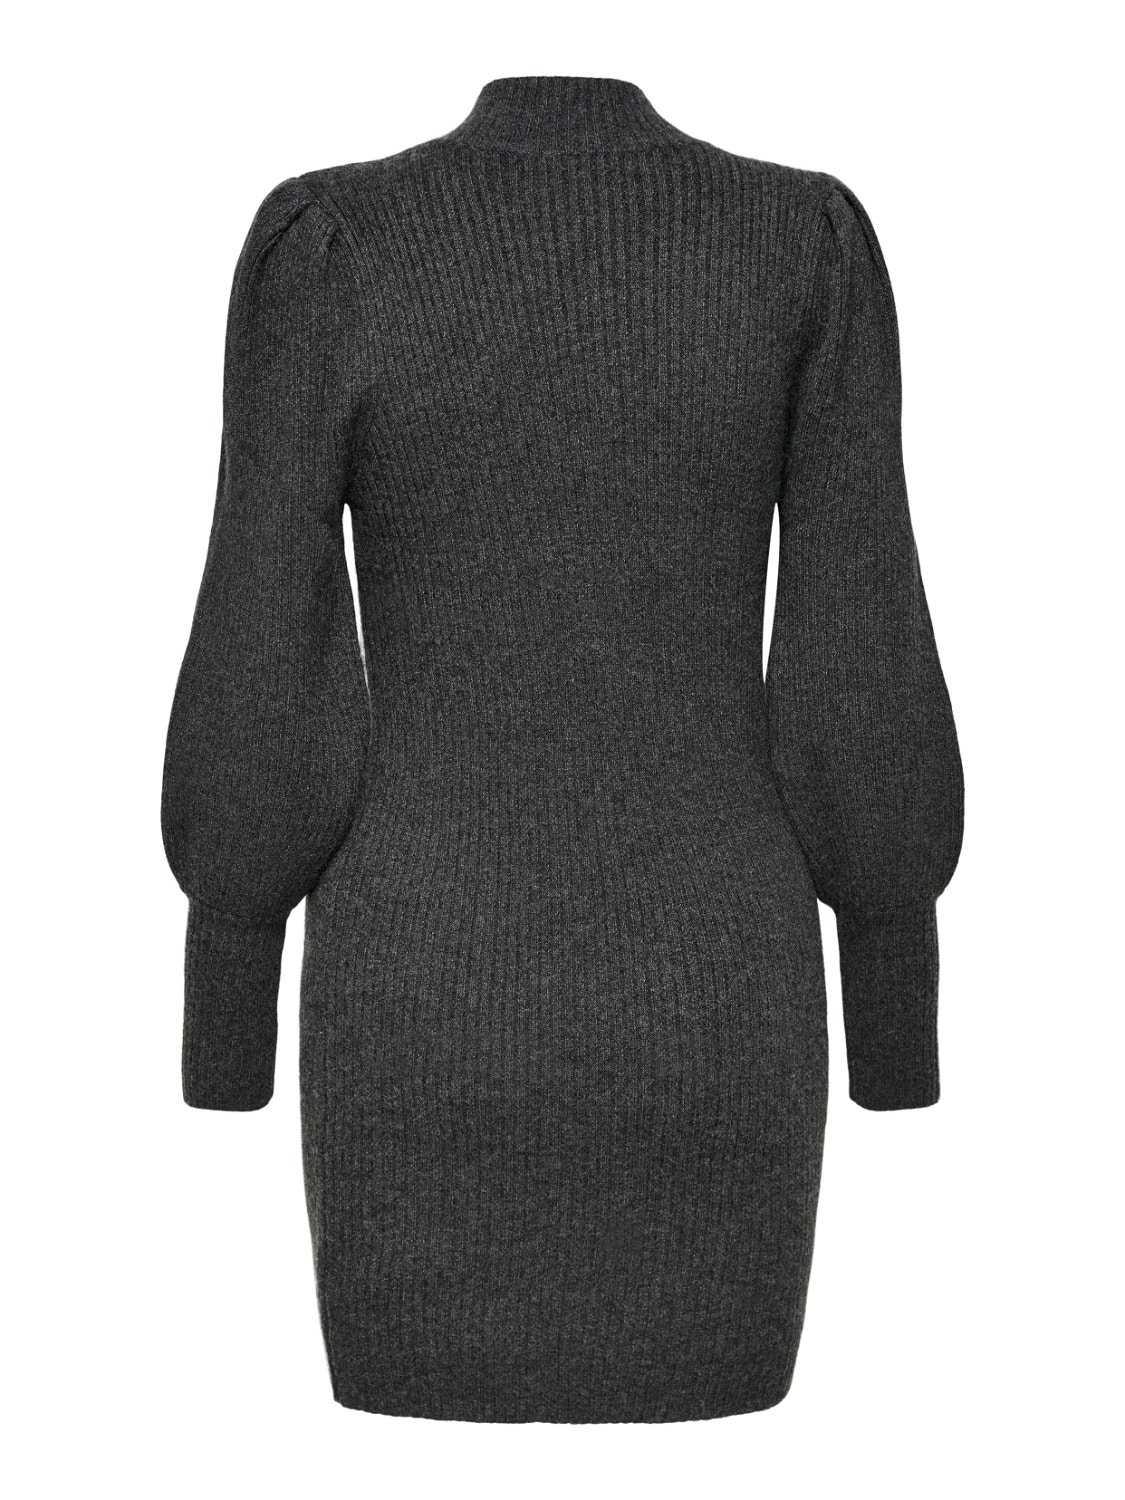 ONLY Mini knit dress with long sleeves -Dark Grey Melange - 15232502